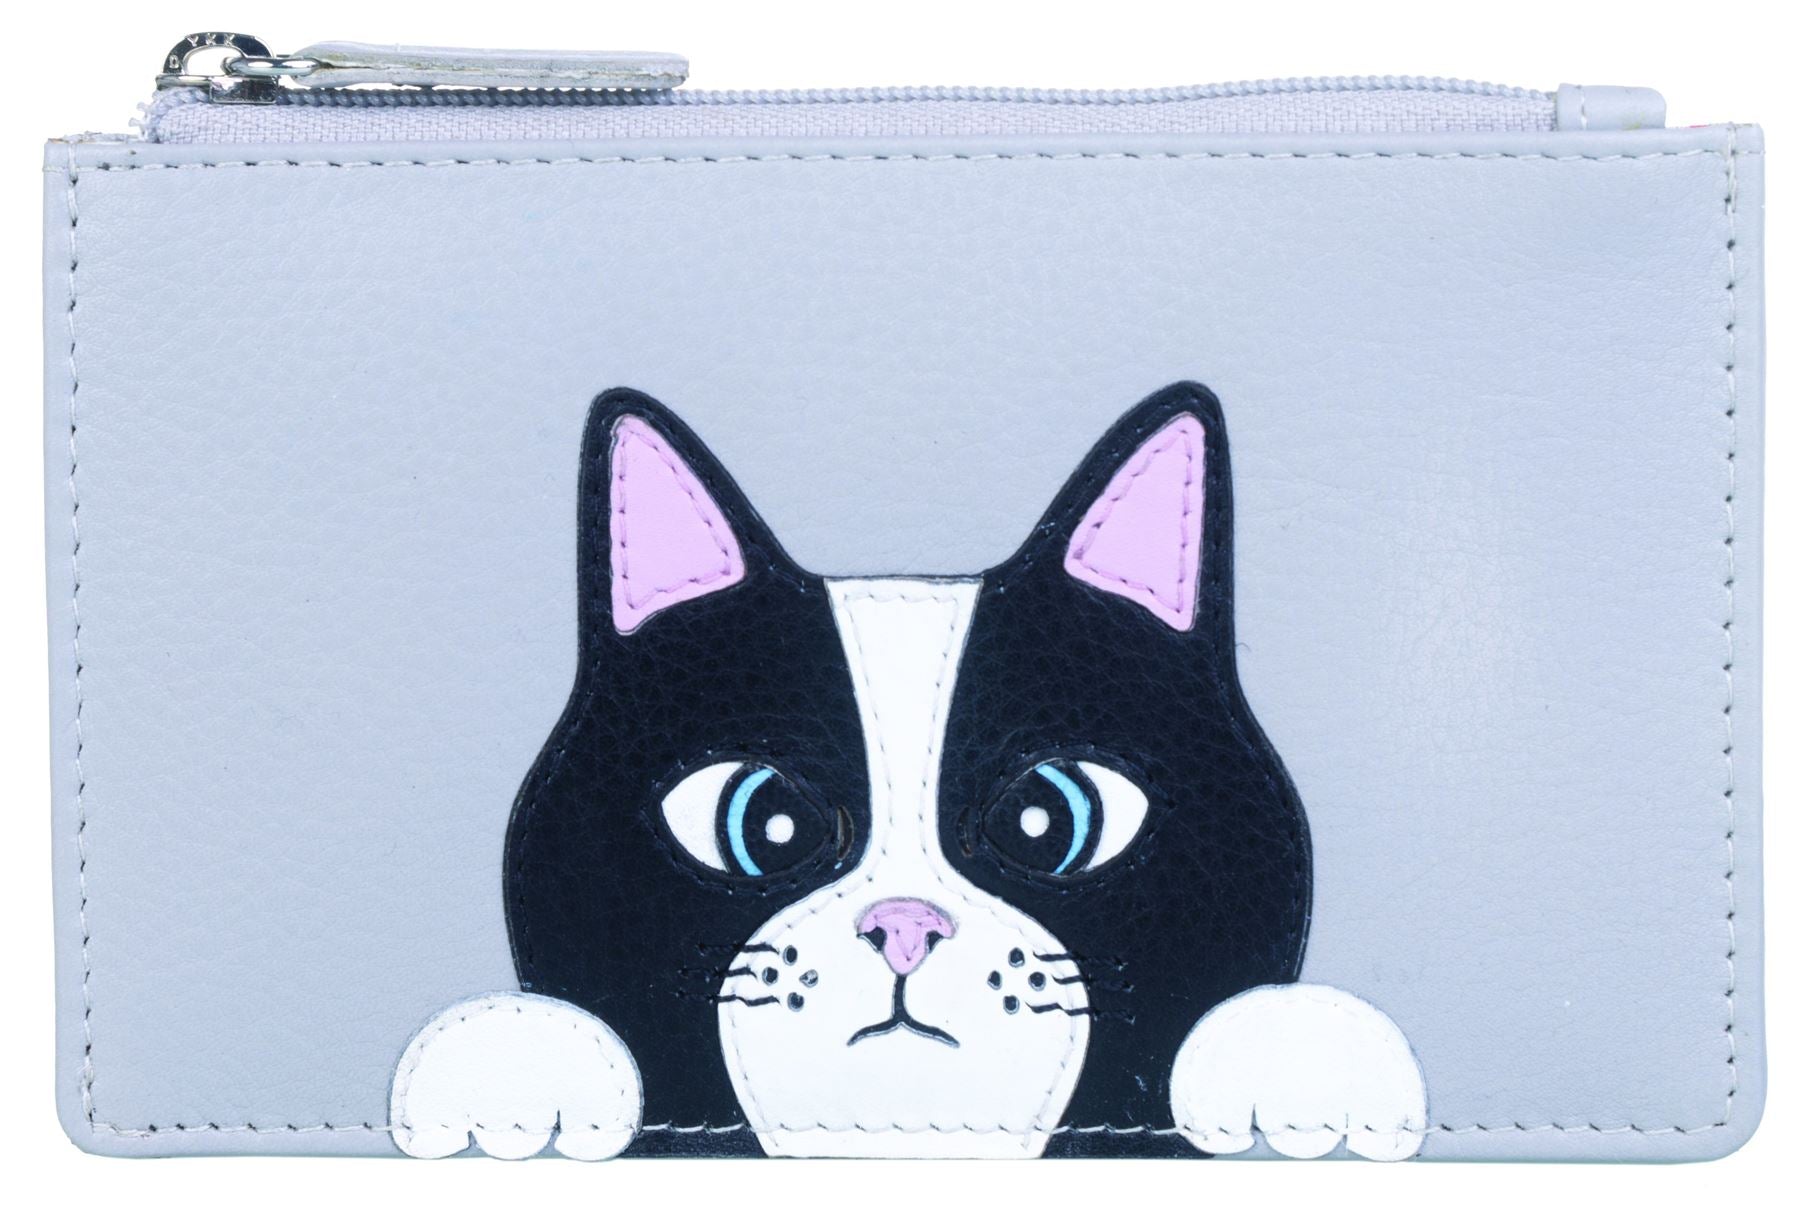 Buy SUMGOGO Small Wallet for Women Cute Cat Pendant Card Holder Organizer  Girls Front Pocket Coin Purse Leather, A-Pink, S at Amazon.in